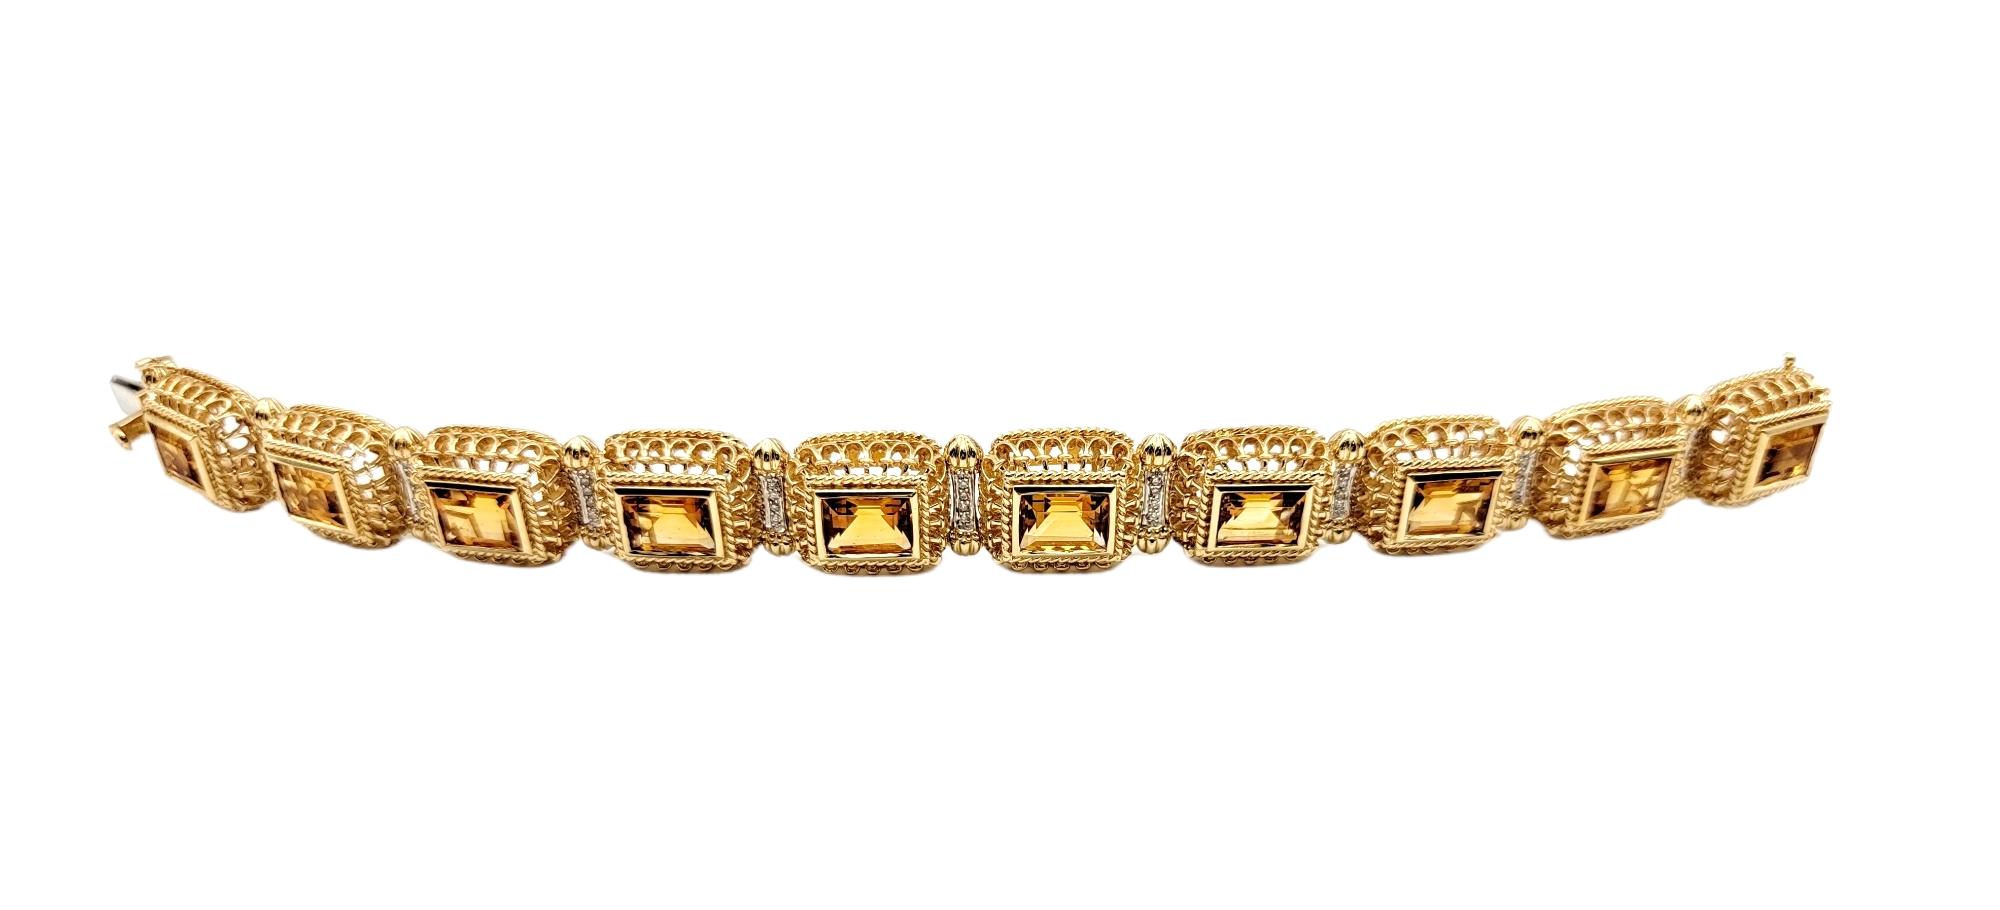 Your wrist will absolutely glow in this stunning yellow gold, citrine and diamond bracelet. Ornate detailing fills the piece, while the warm golden tones radiate against the skin. 10 rectangular step cut citrines form a single elegant row, while the